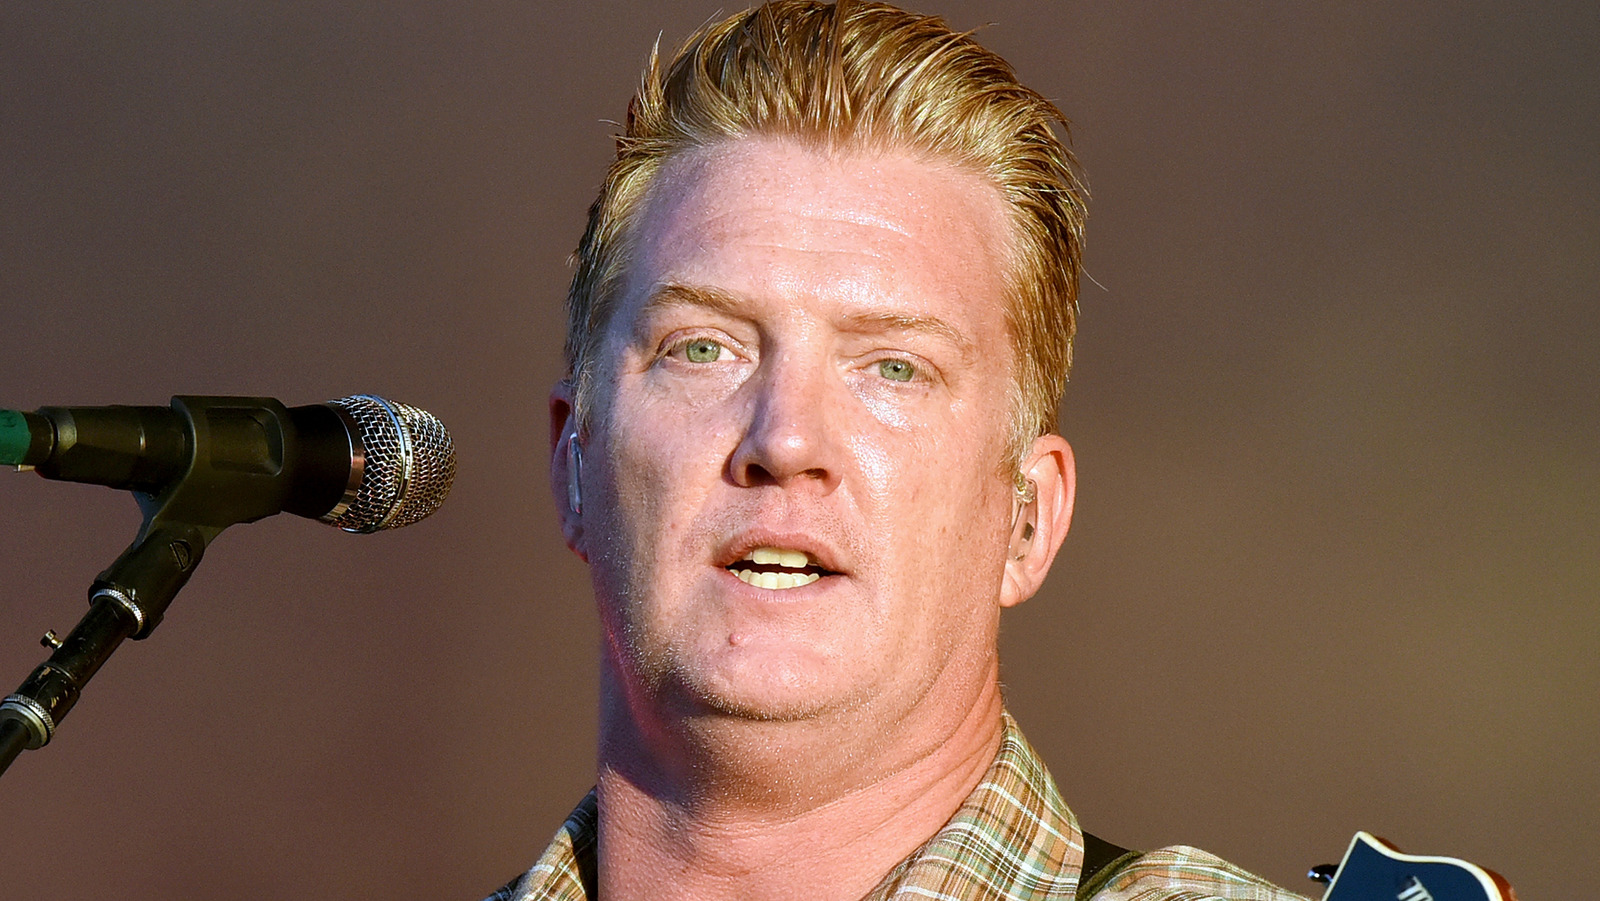 Rated R': How Queens Of The Stone Age Became Rock Royalty